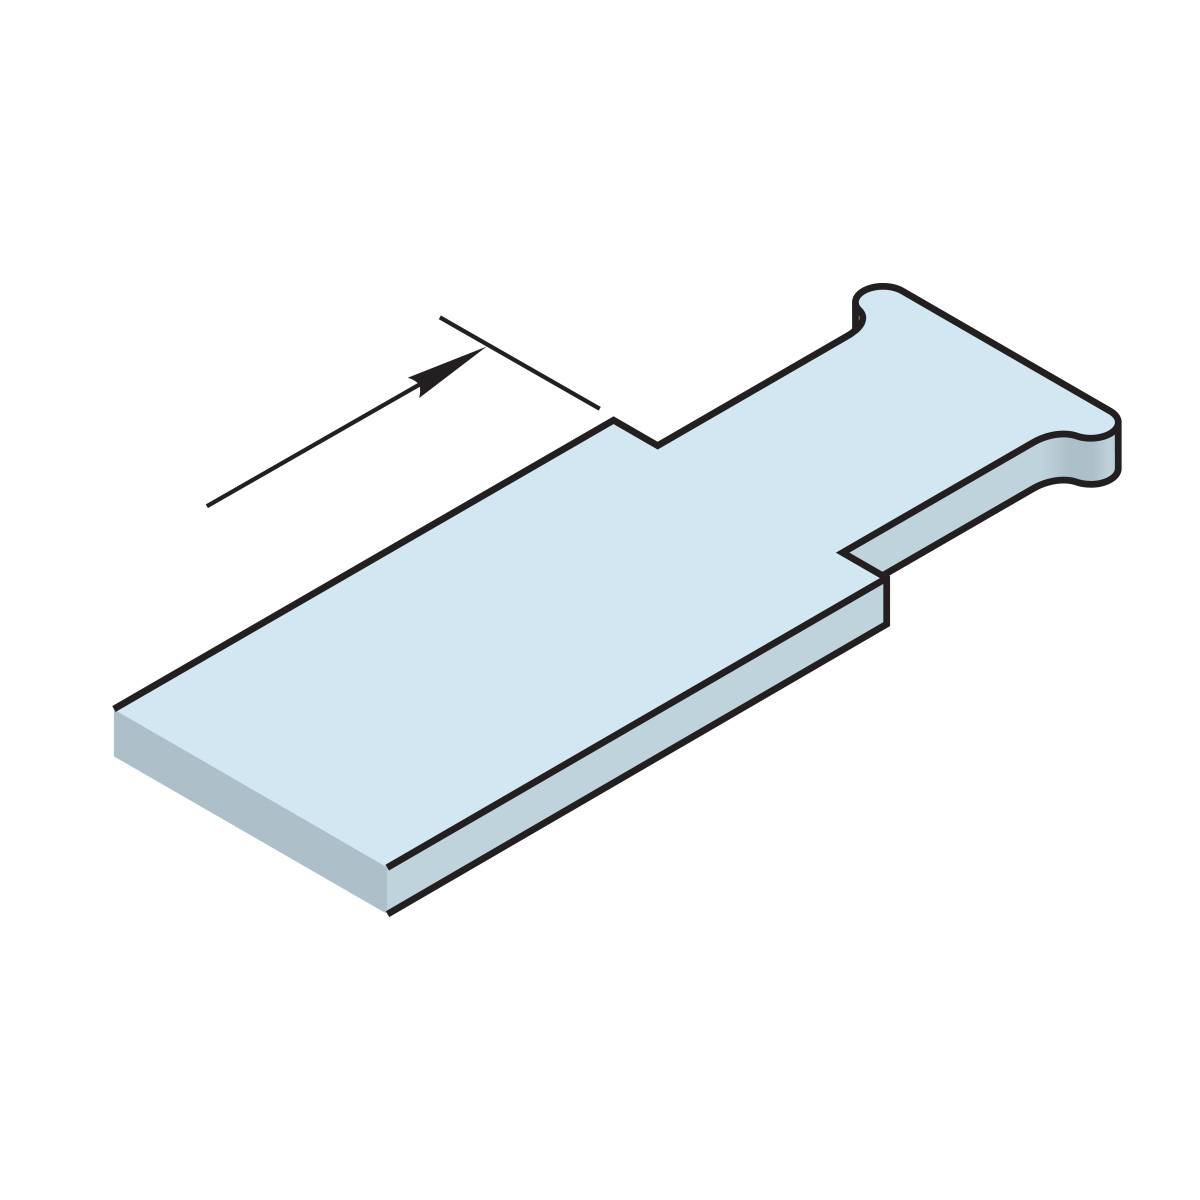 Ancon Wall Ties for Channels/ Slots